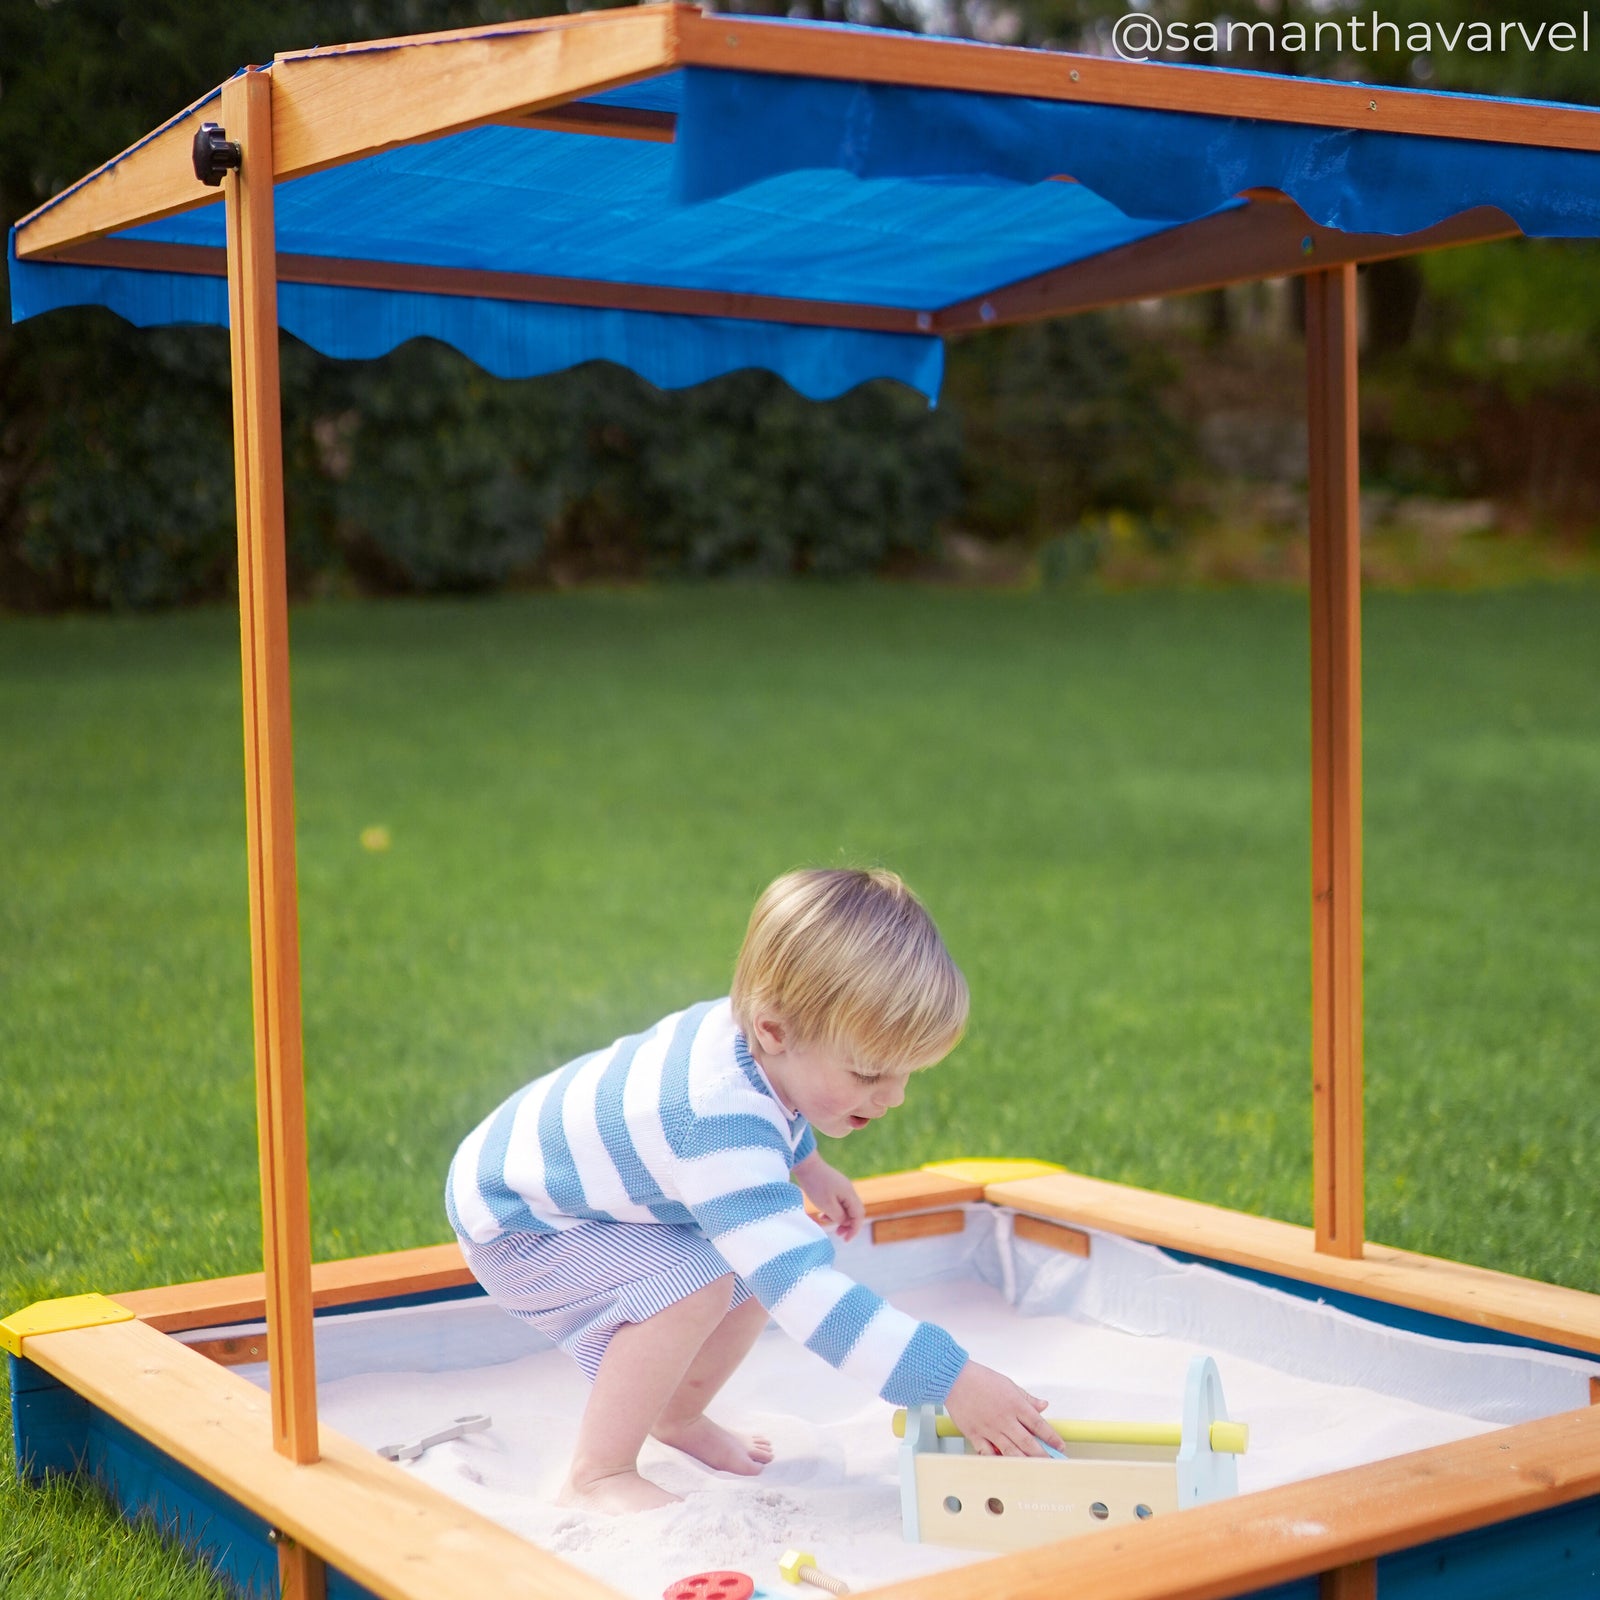 a young boy plays in his large sand box, protected from the sun with the canopy overhead